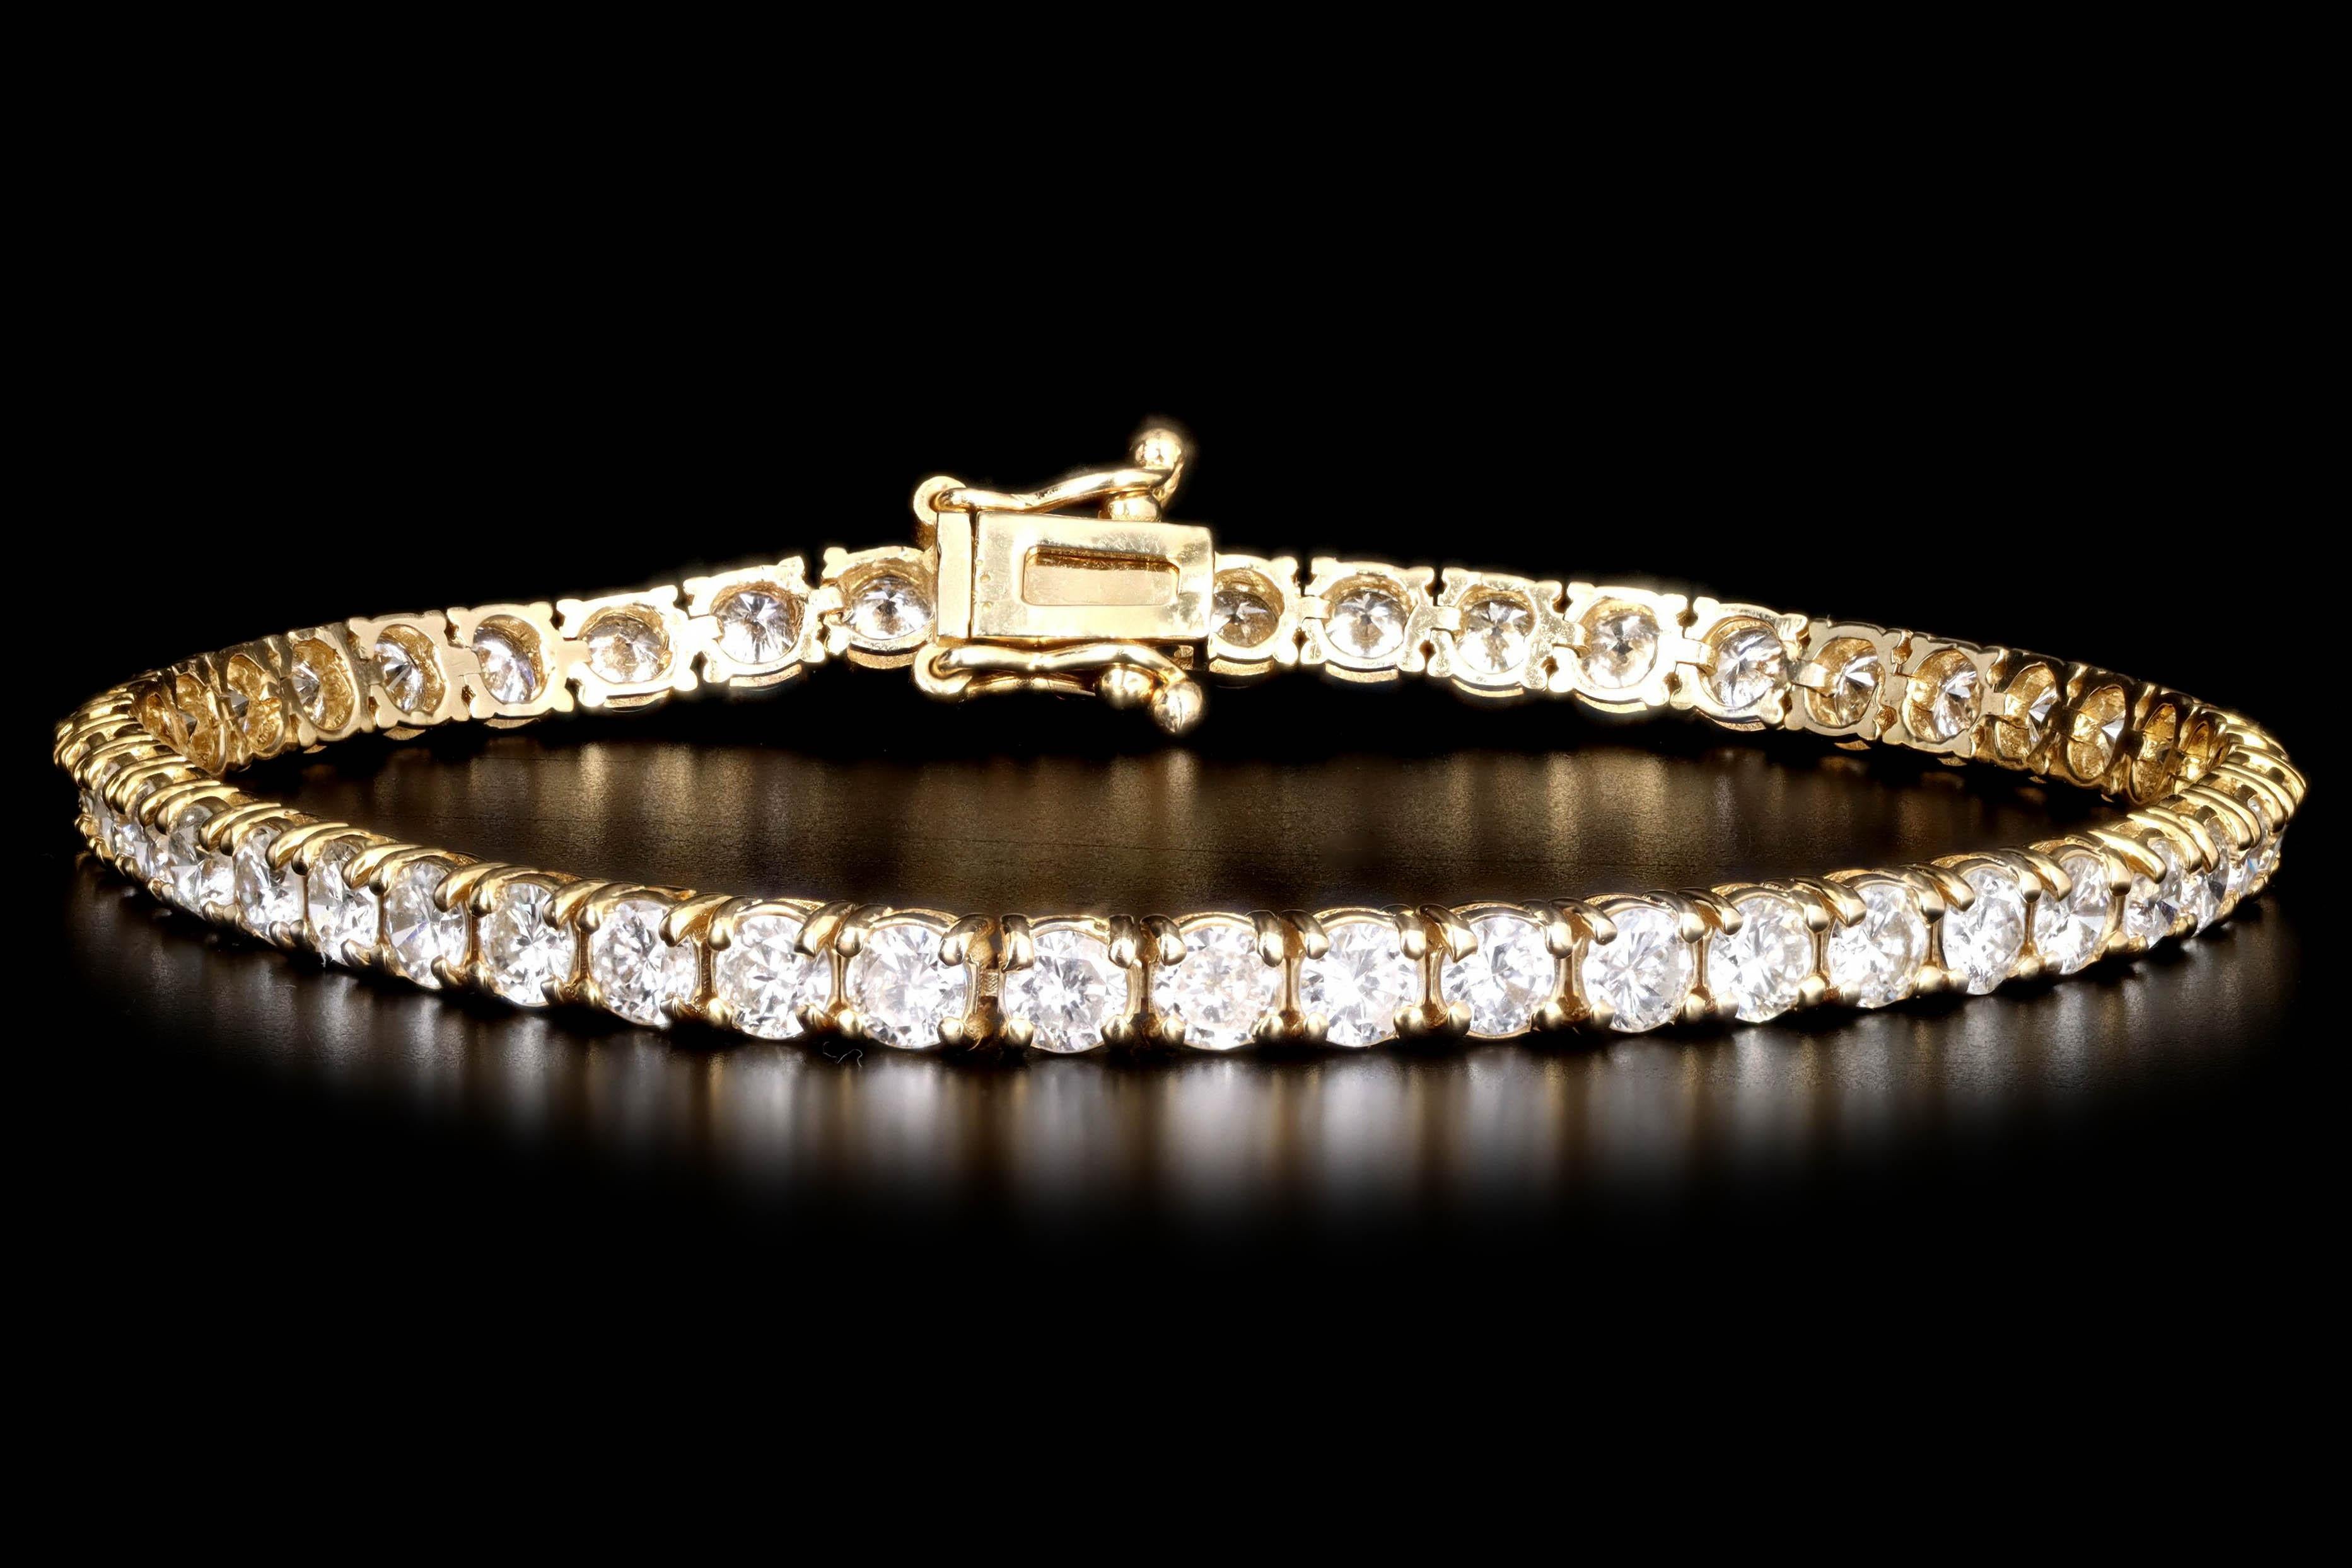 Era: New

Composition: 14K Yellow Gold

Primary Stone: Forty Two Round Brilliant Cut Diamonds

Total Carat Weight: Approximately 6.42 Carats

Color/Clarity: G/H - SI1/2

Bracelet Length: 7 Inches

Bracelet Weight: 8.5 Grams 

Item Barcode: 412325